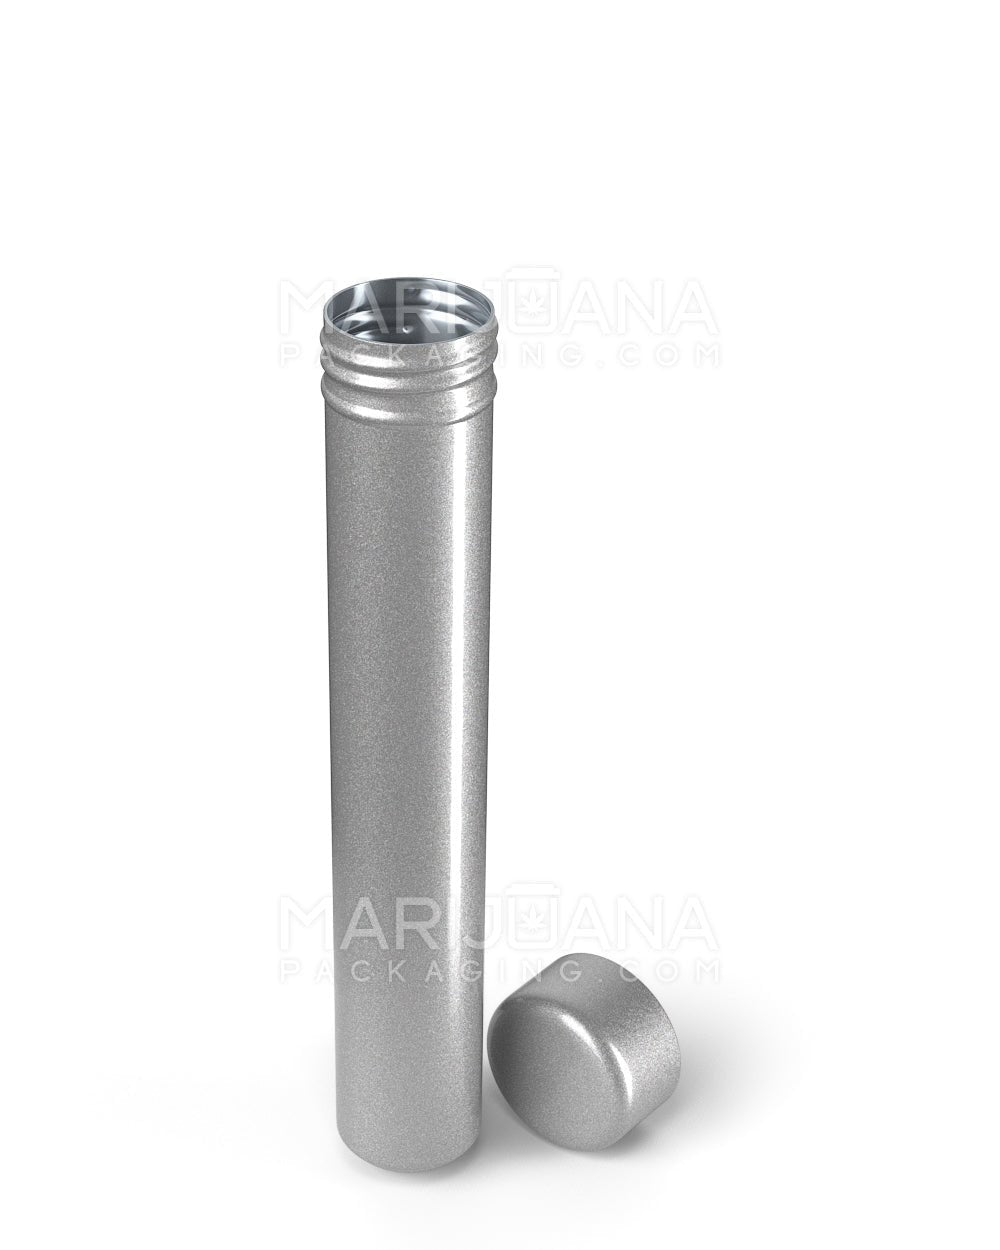 Child Resistant | King Size Pop Top Opaque Metal Pre-Roll Tubes | 110mm - Silver - 250 Count - 4